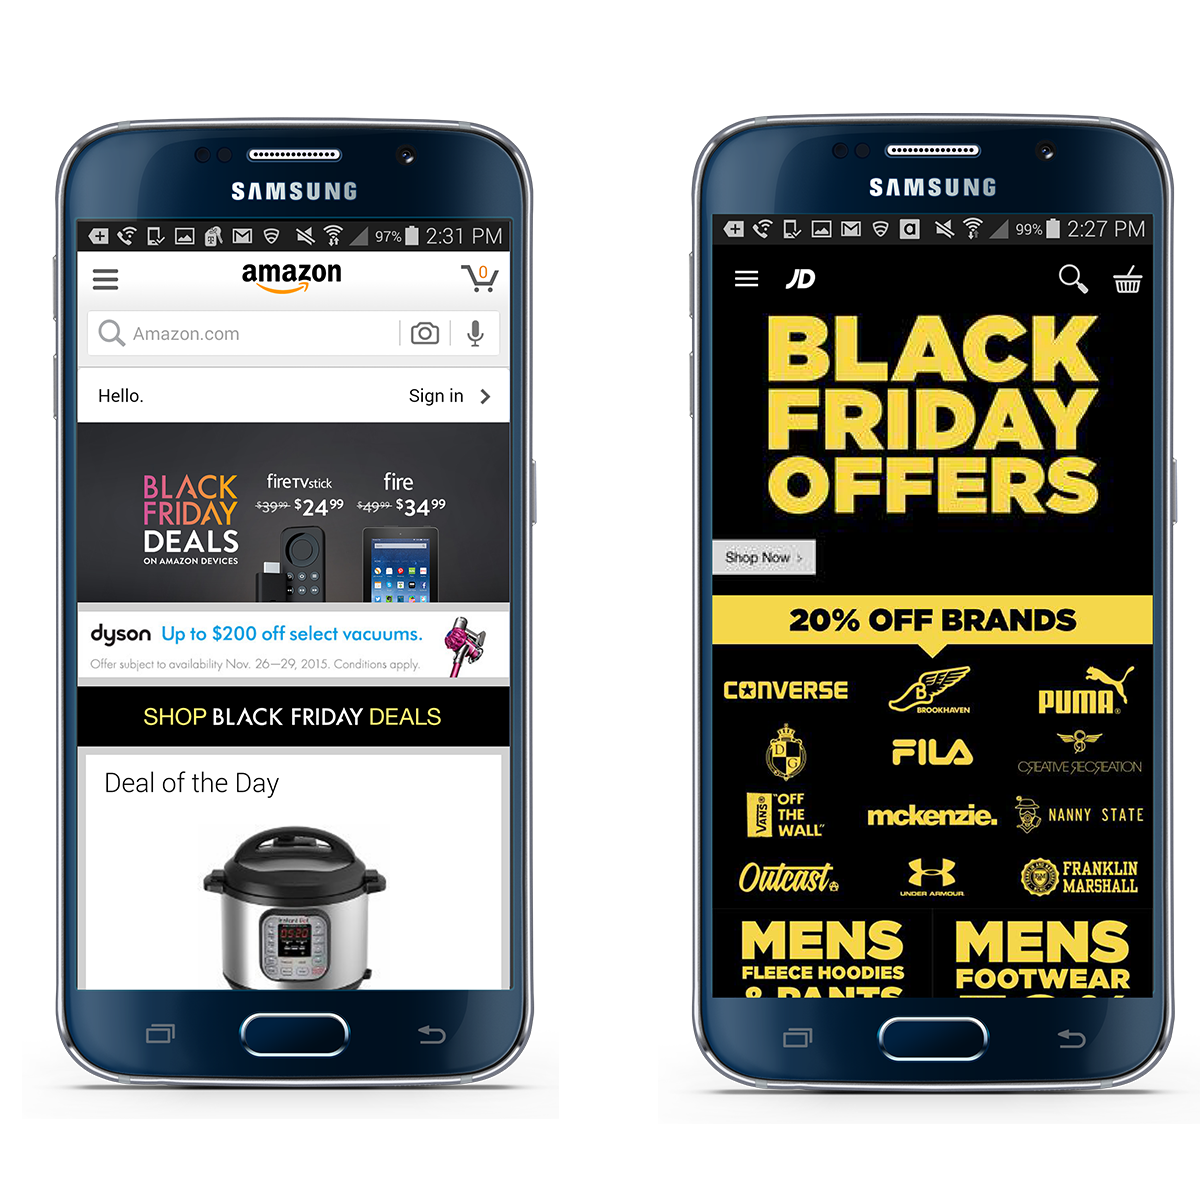 JD Sport and Amazon Black Friday Ads